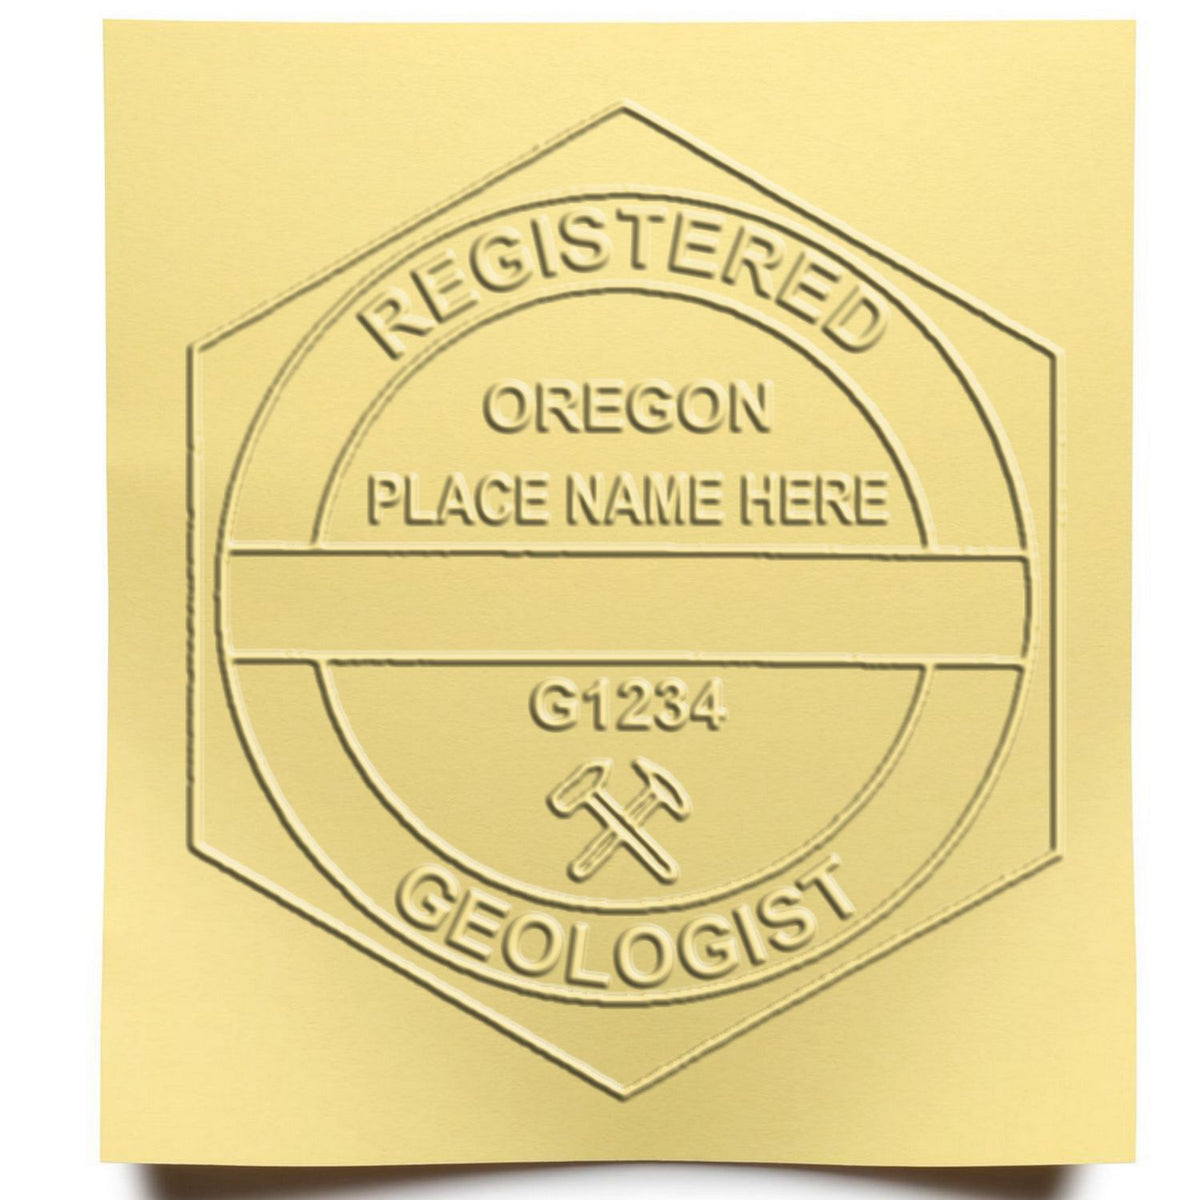 An in use photo of the Oregon Geologist Desk Seal showing a sample imprint on a cardstock